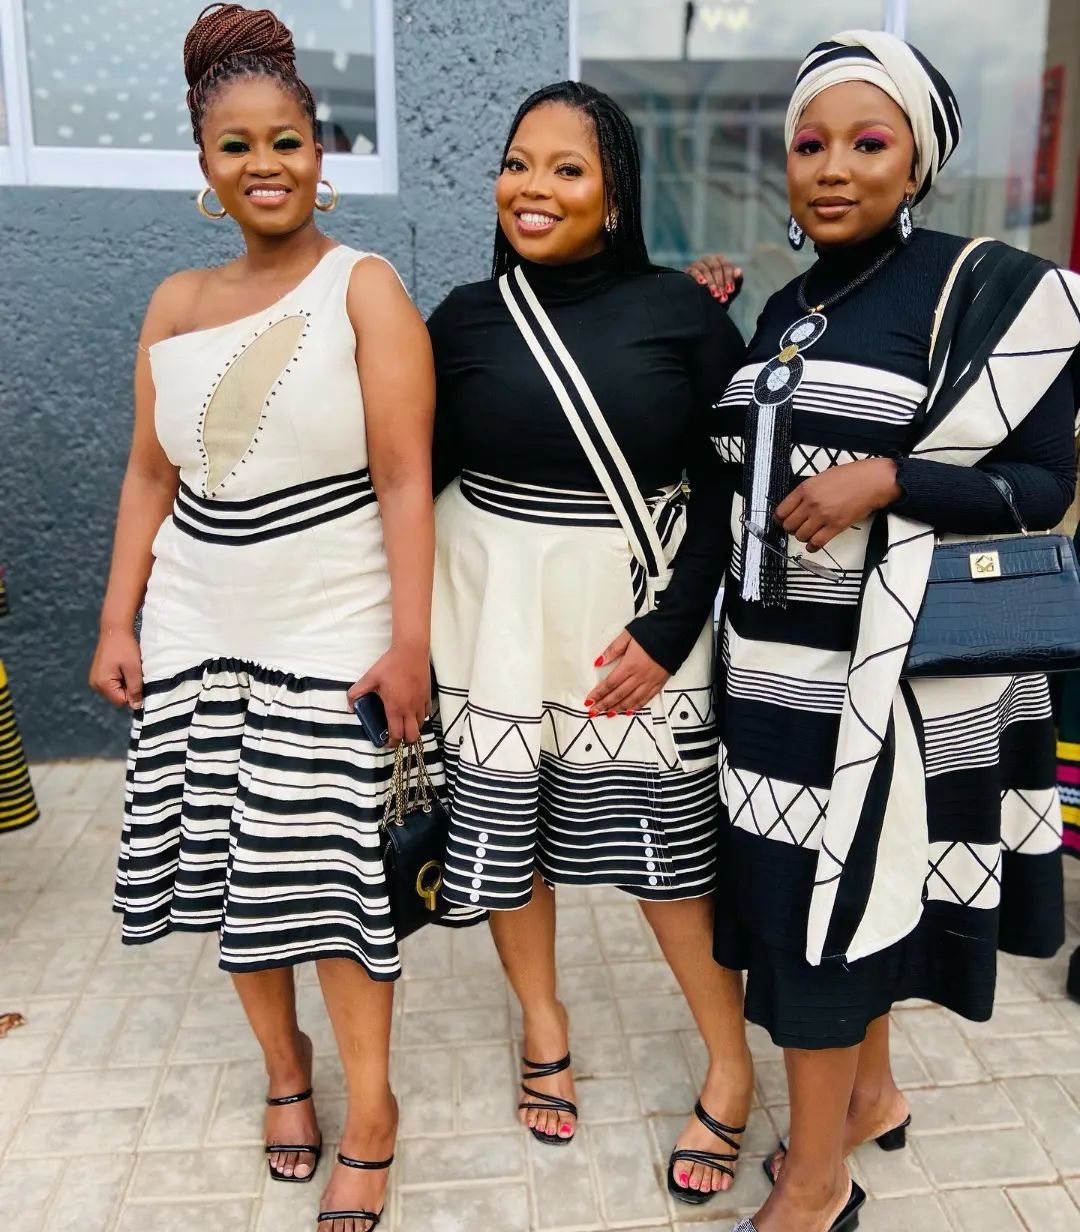 Xhosa Traditional Attire Takes Center Stage at Annual Fashion Show 15